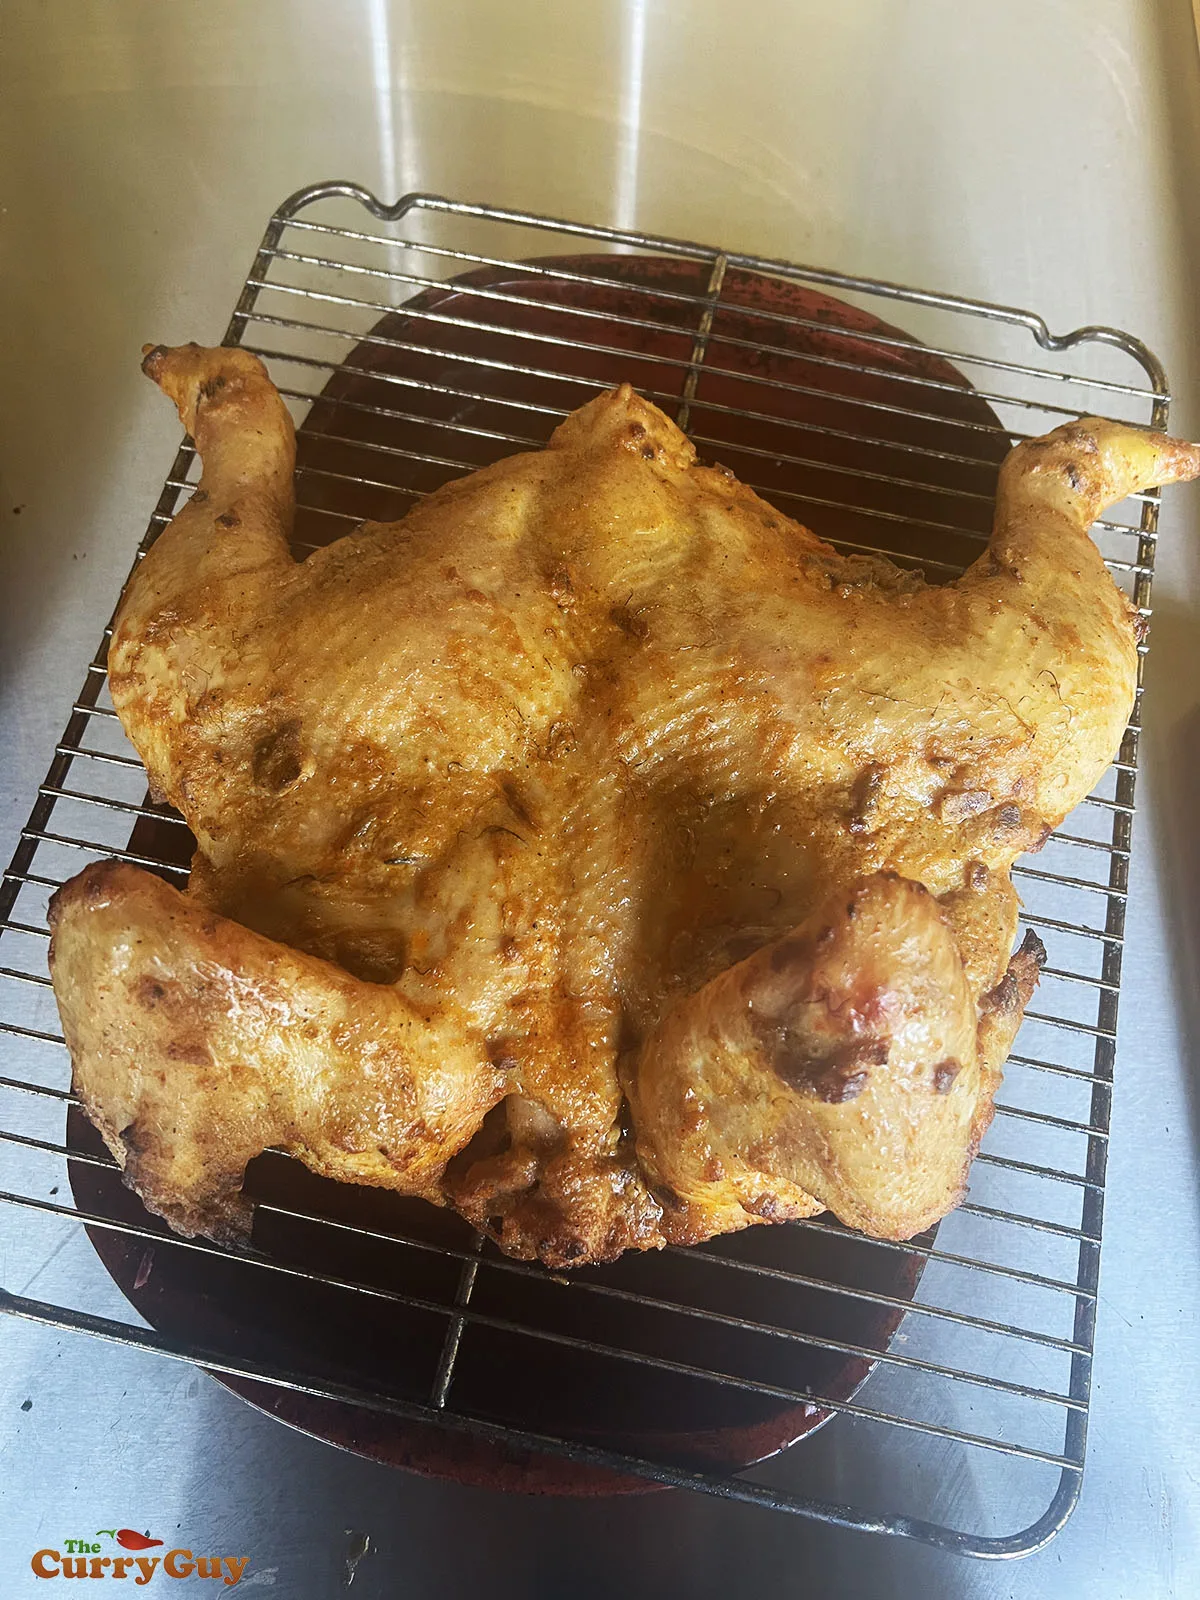 Half cooked chicken on a metal rack, drying and dripping.